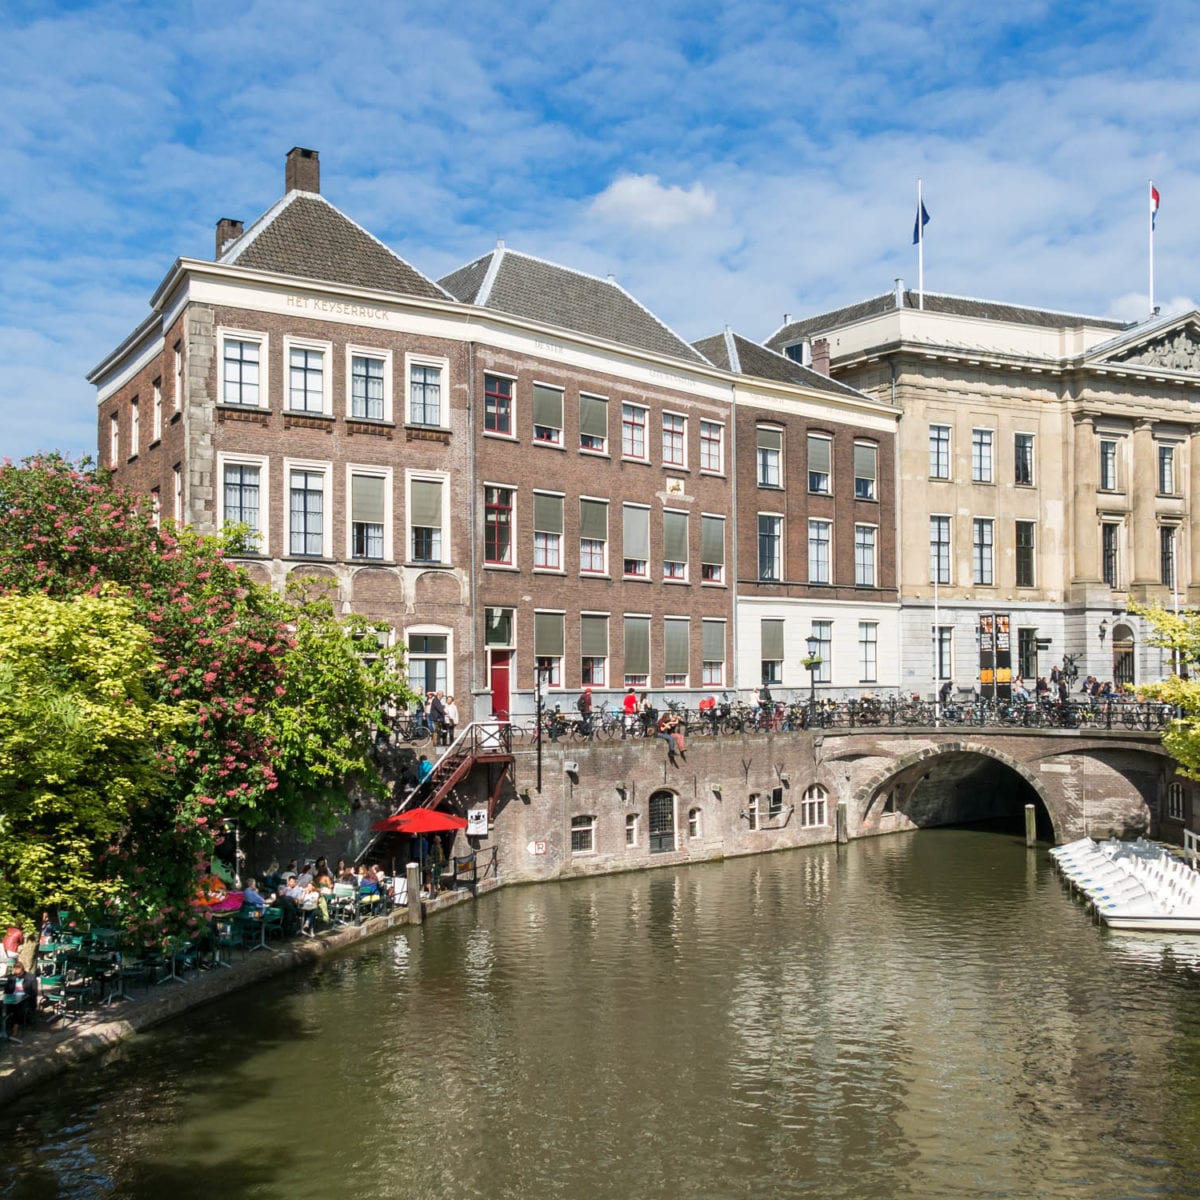 Town Hall Bridge on Oudegracht canal in the city of Utrecht